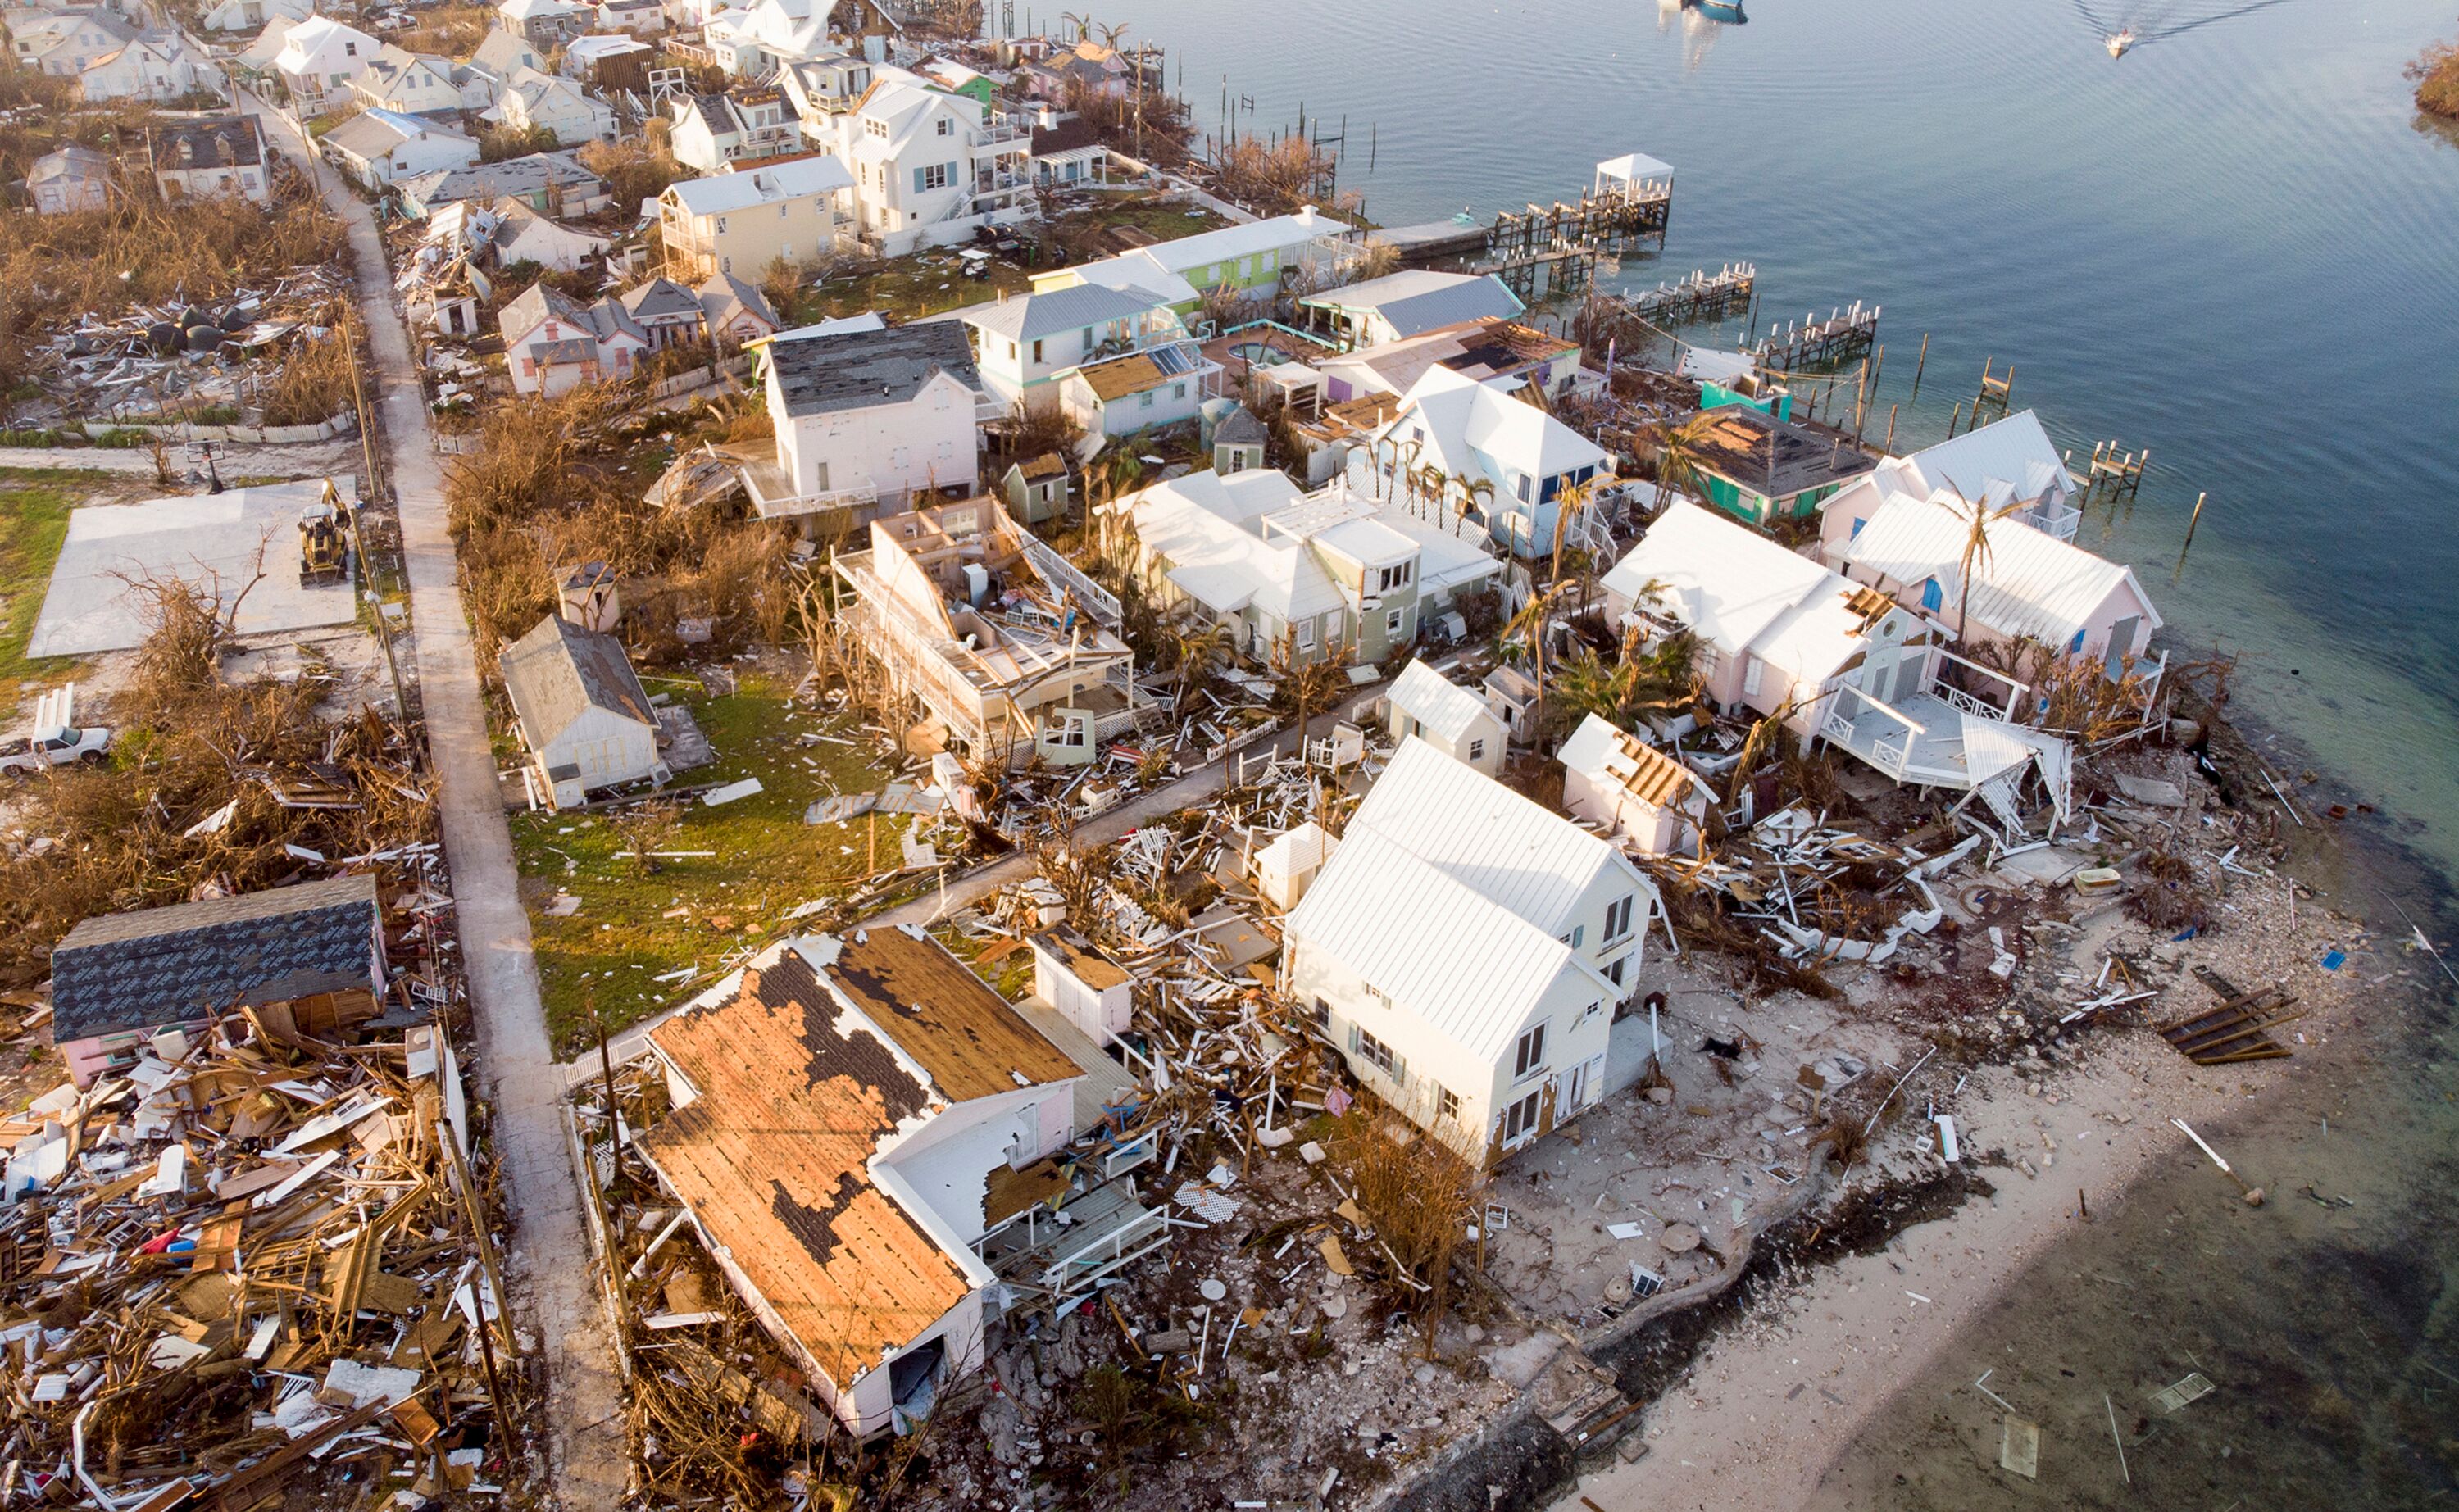 Homes destroyed by hurricane Dorian in the Bahamas | Photo: Getty Images